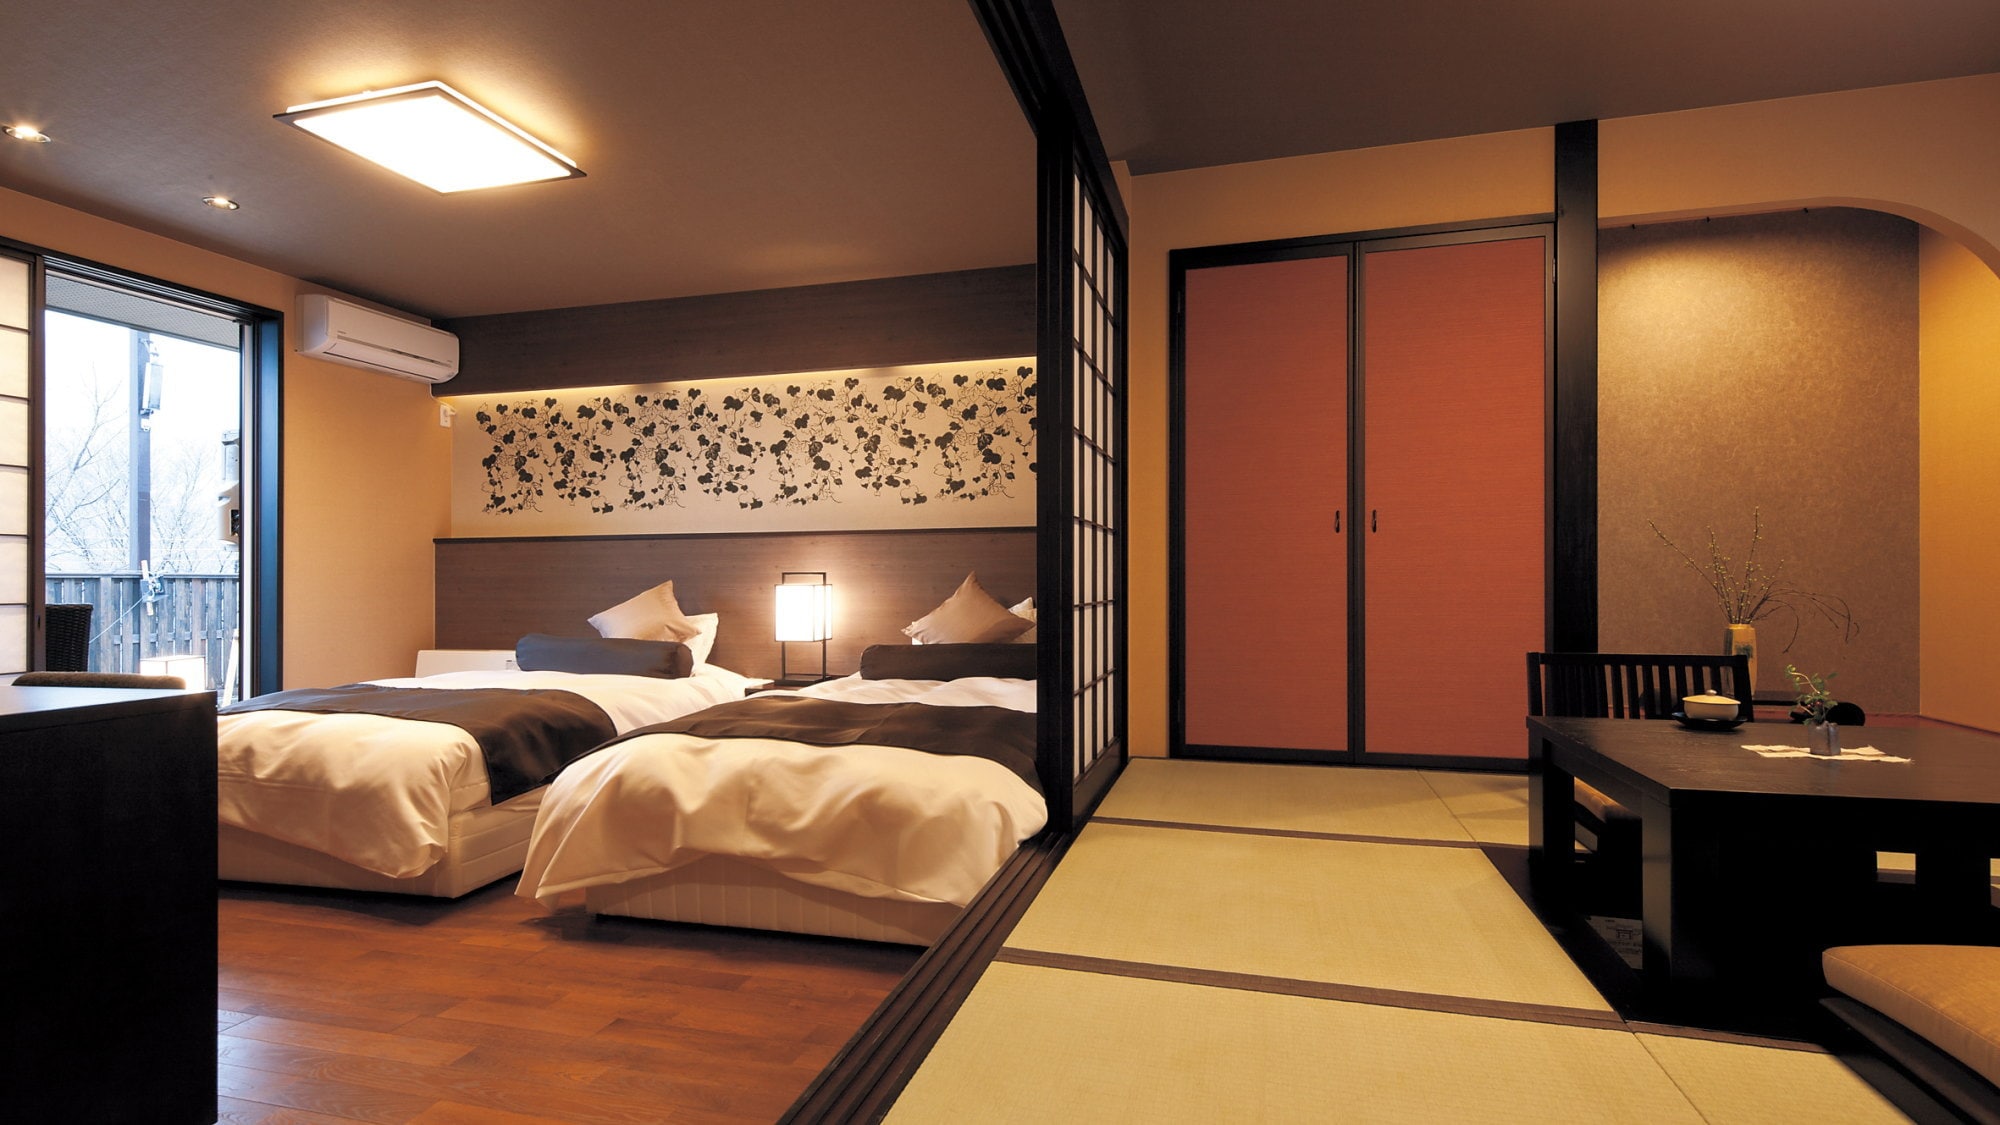 Please enjoy the rooms that are adjacent to Japanese-style and Western-style rooms.